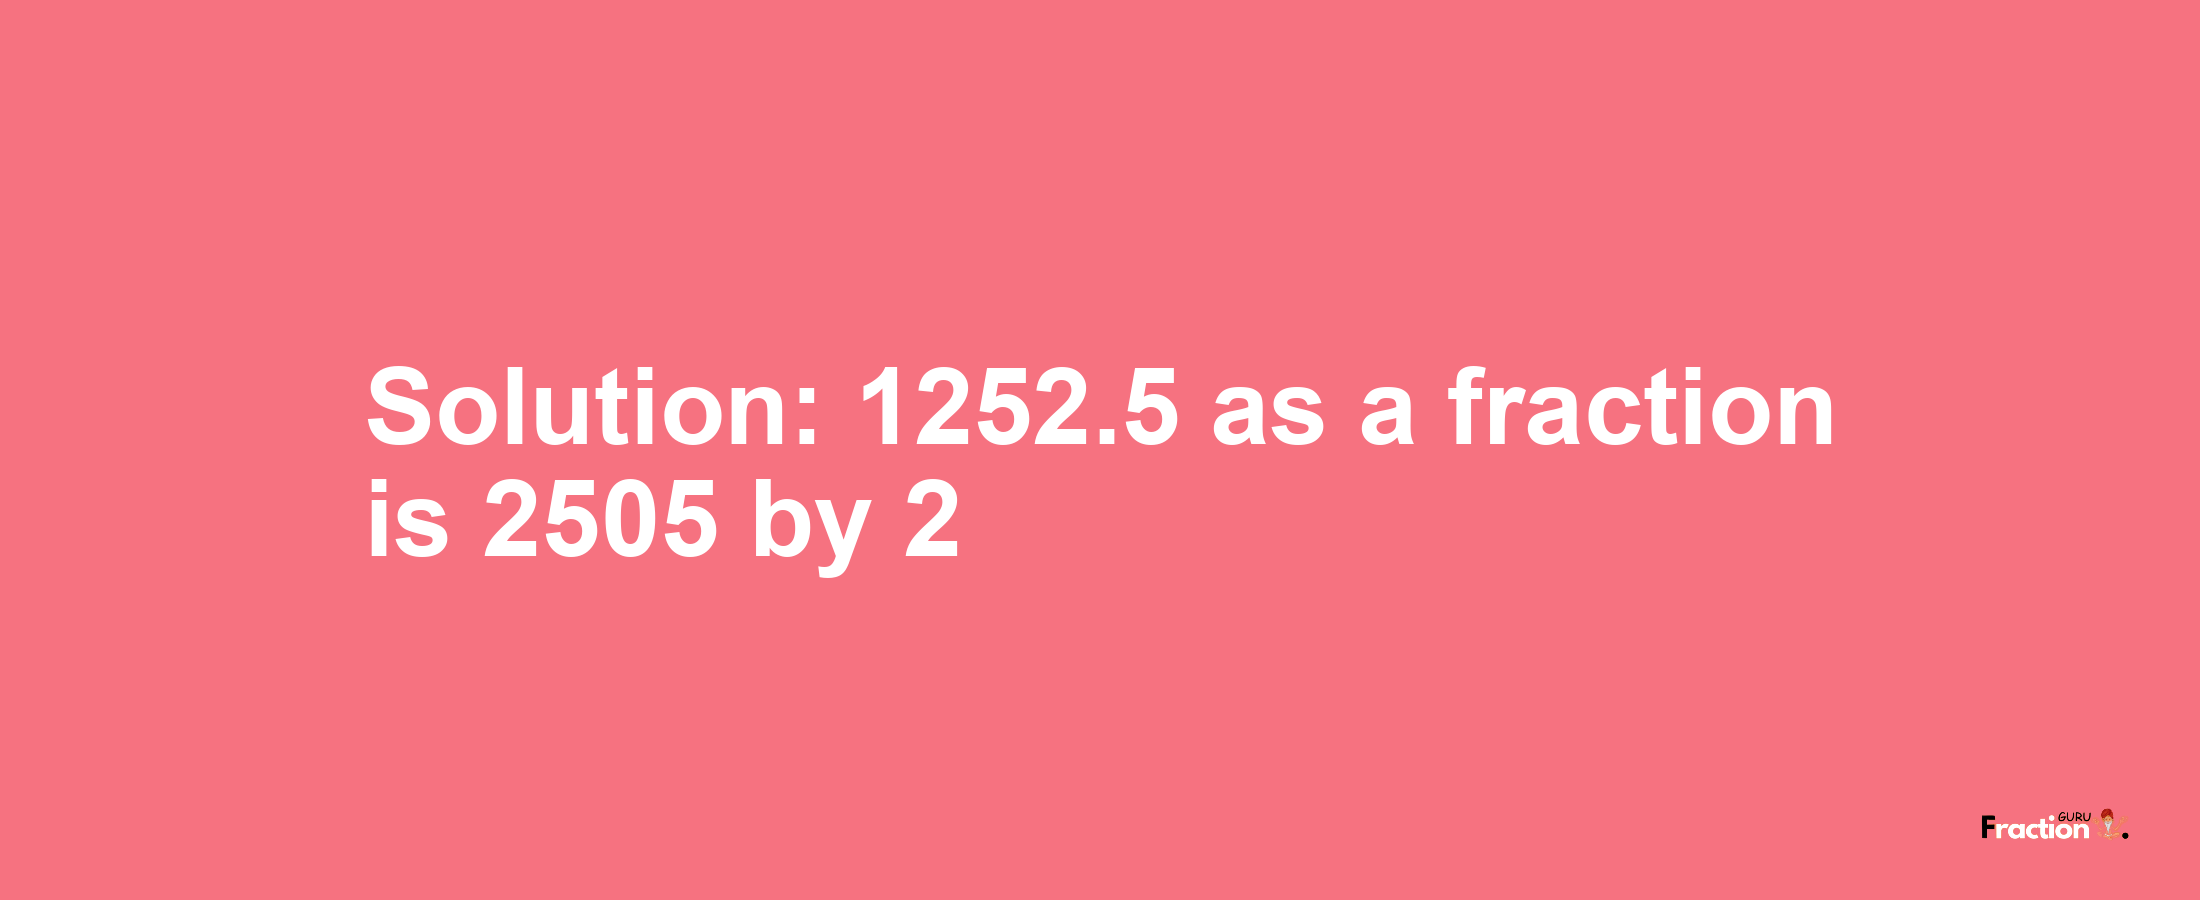 Solution:1252.5 as a fraction is 2505/2